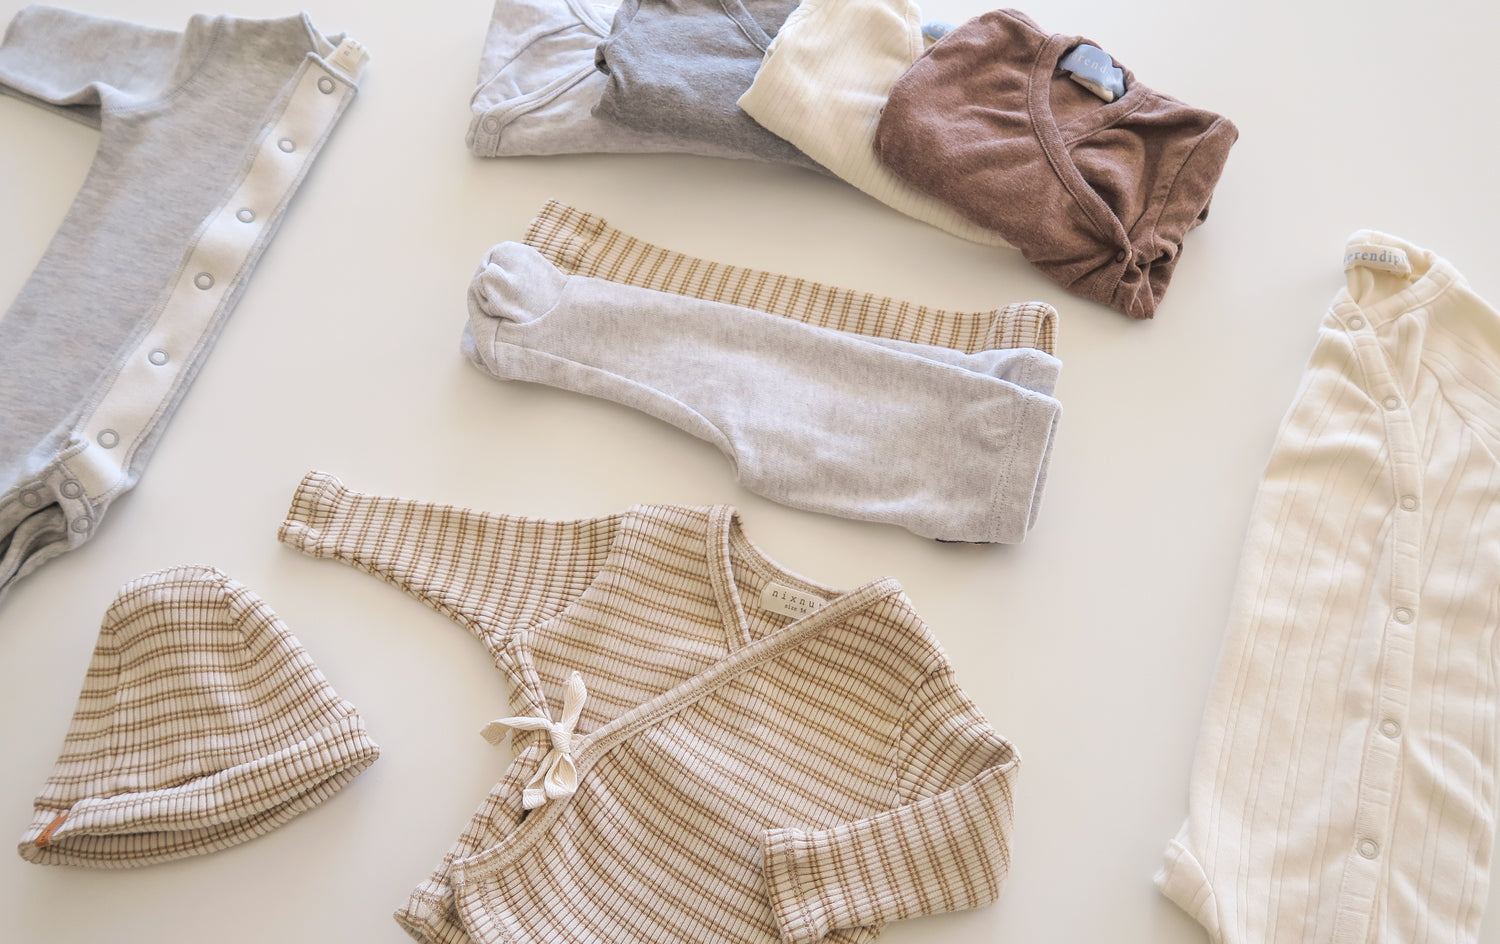 Folded practical baby clothes from OiOiOi in organic cotton, striped and natural colors